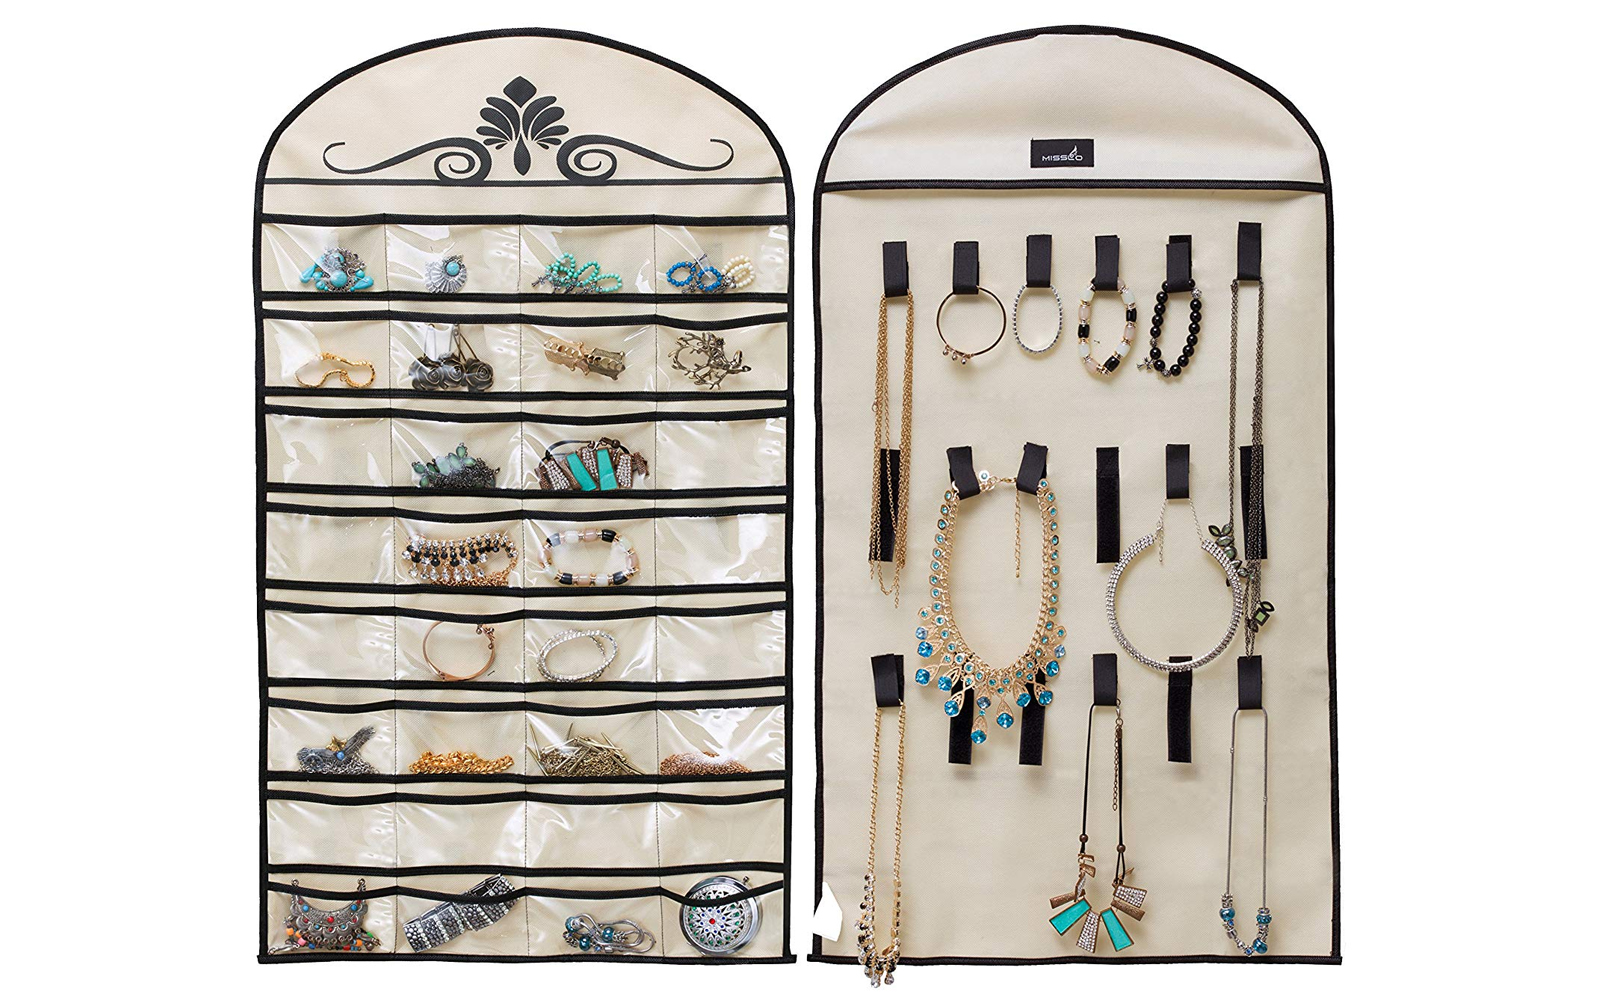 travel jewelry case for long necklaces